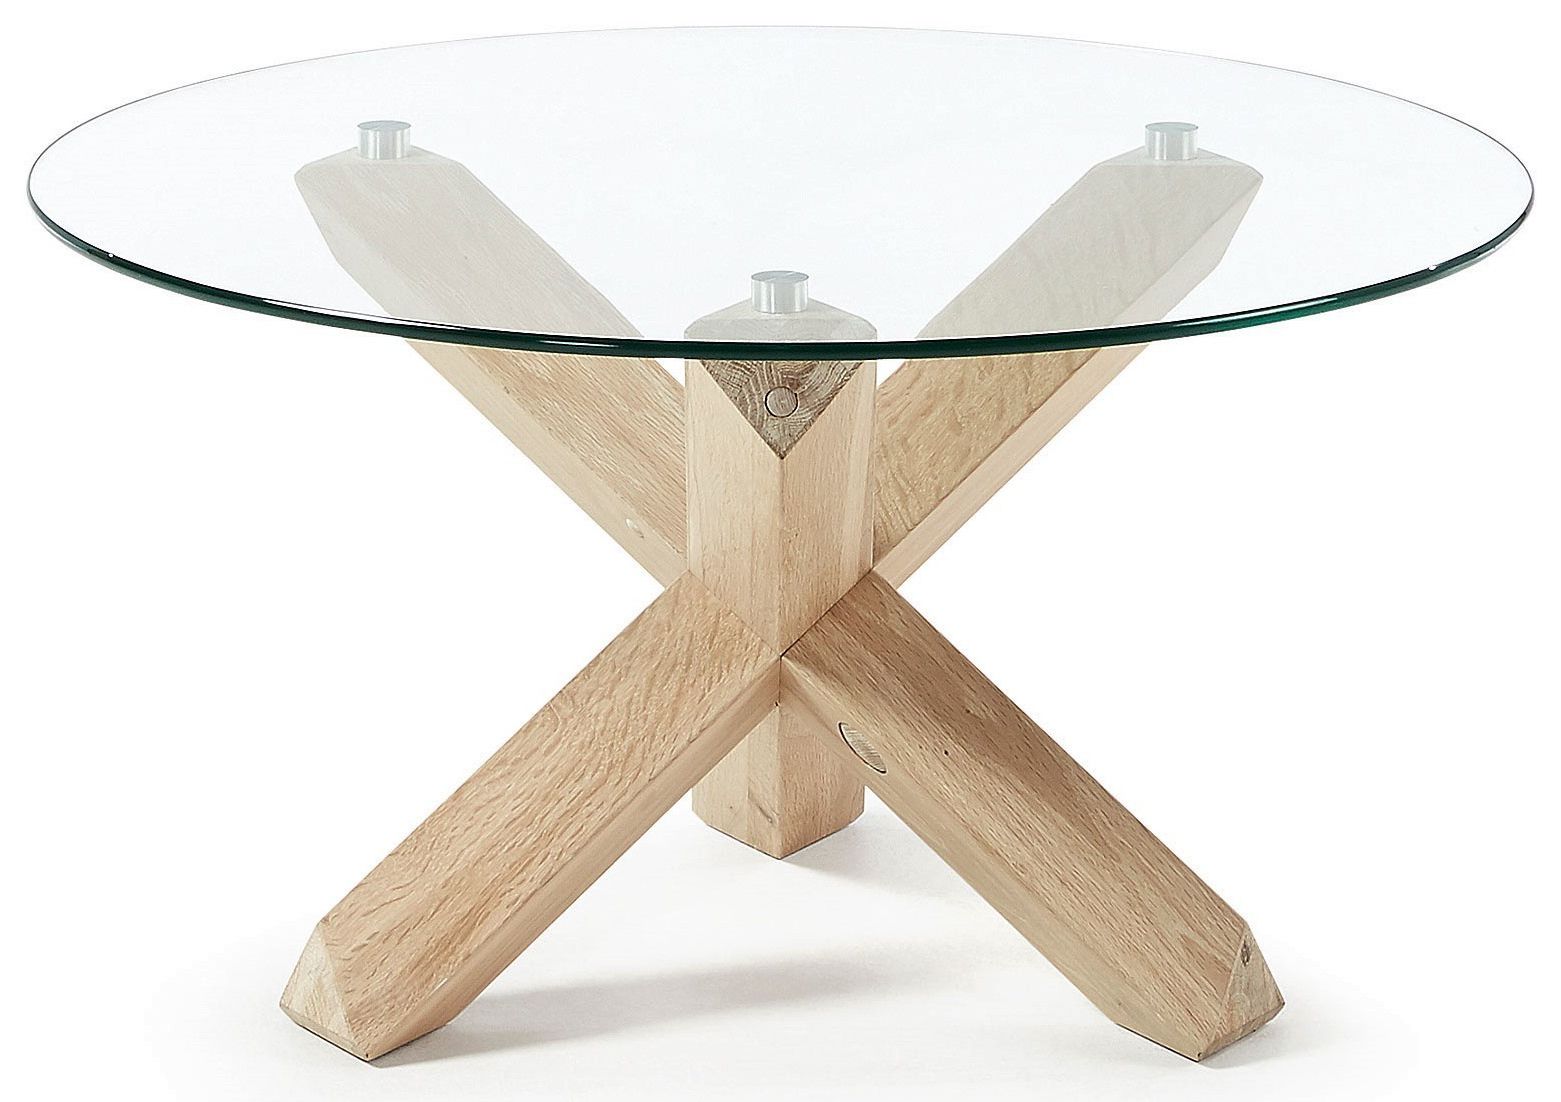 Dominik Diam 65 Coffee Table In Bleached Oak Wood And Tempered Glass Top Intended For Trendy Glass Top Coffee Tables (View 15 of 20)